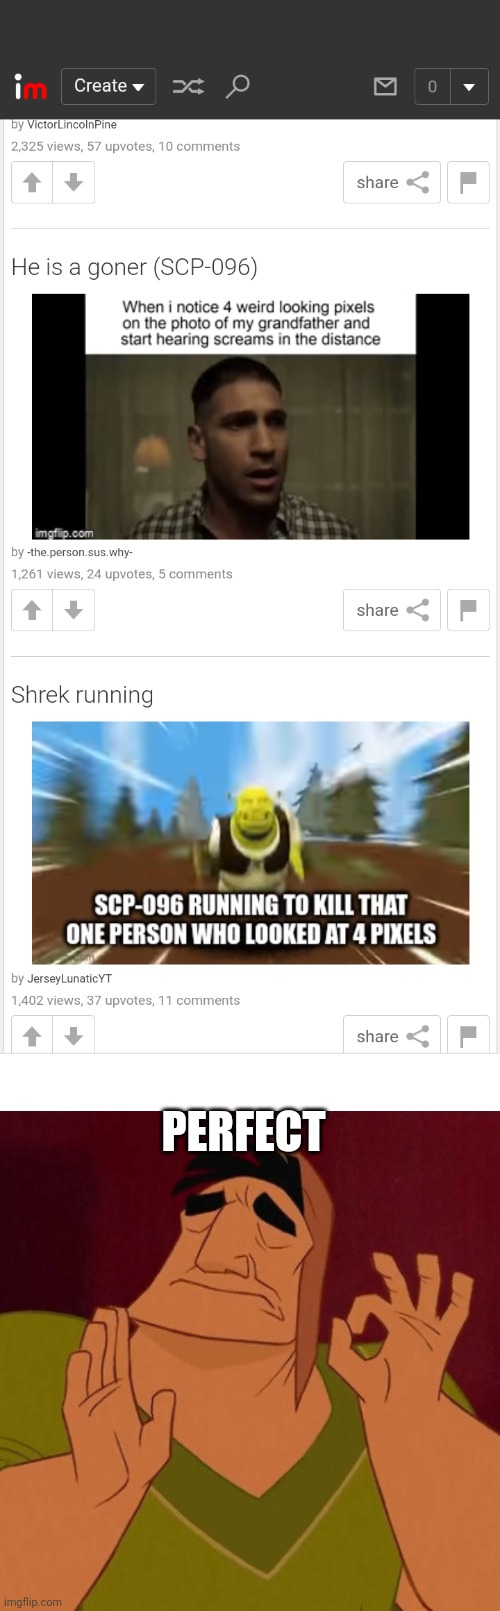 True perfection | PERFECT | image tagged in when x just right,scp meme,scp,stop reading the tags,dumbass | made w/ Imgflip meme maker